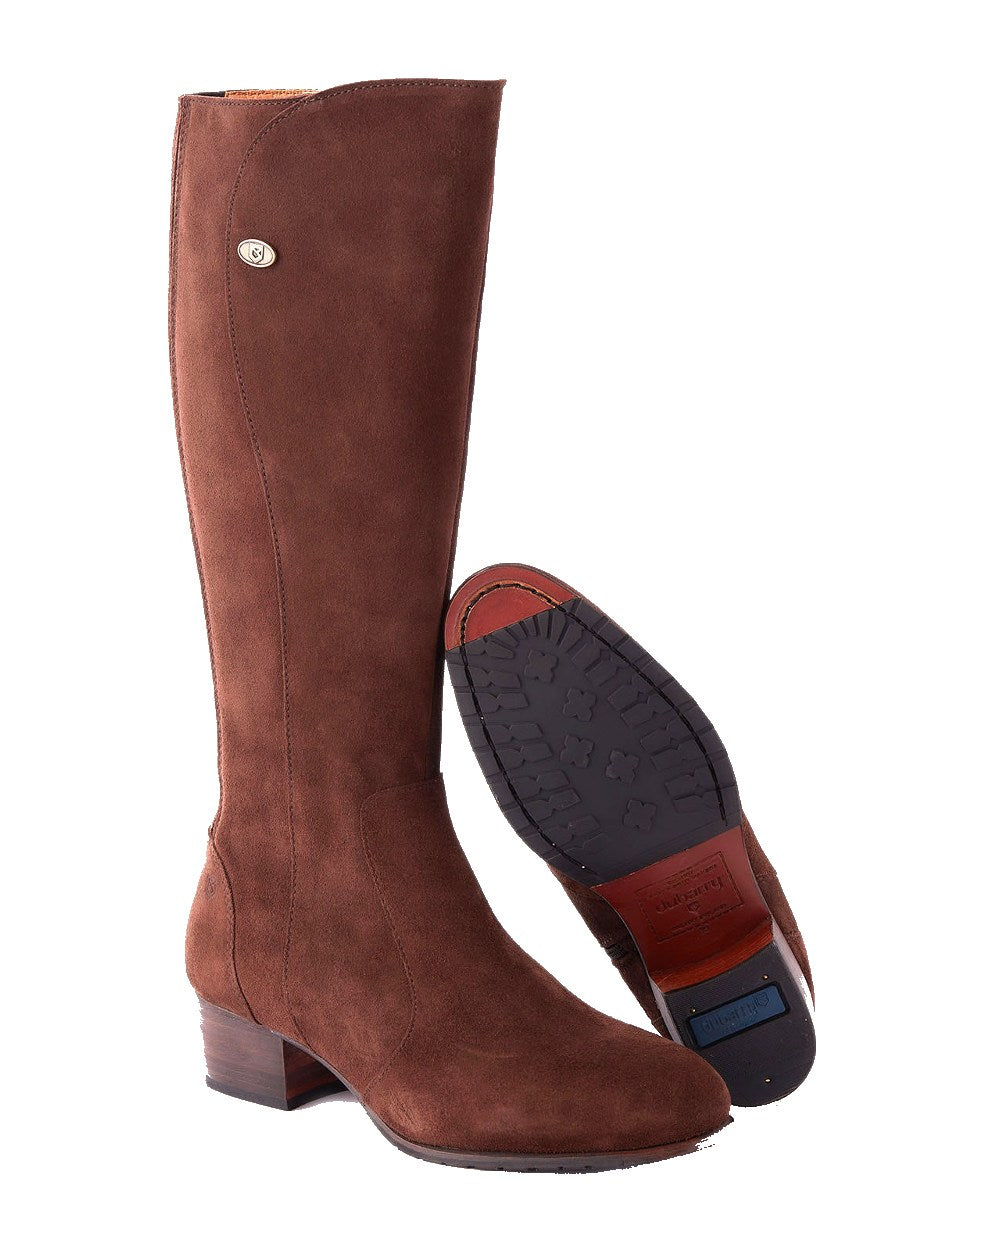 Dubarry Downpatrick Knee High Boots in Cigar 